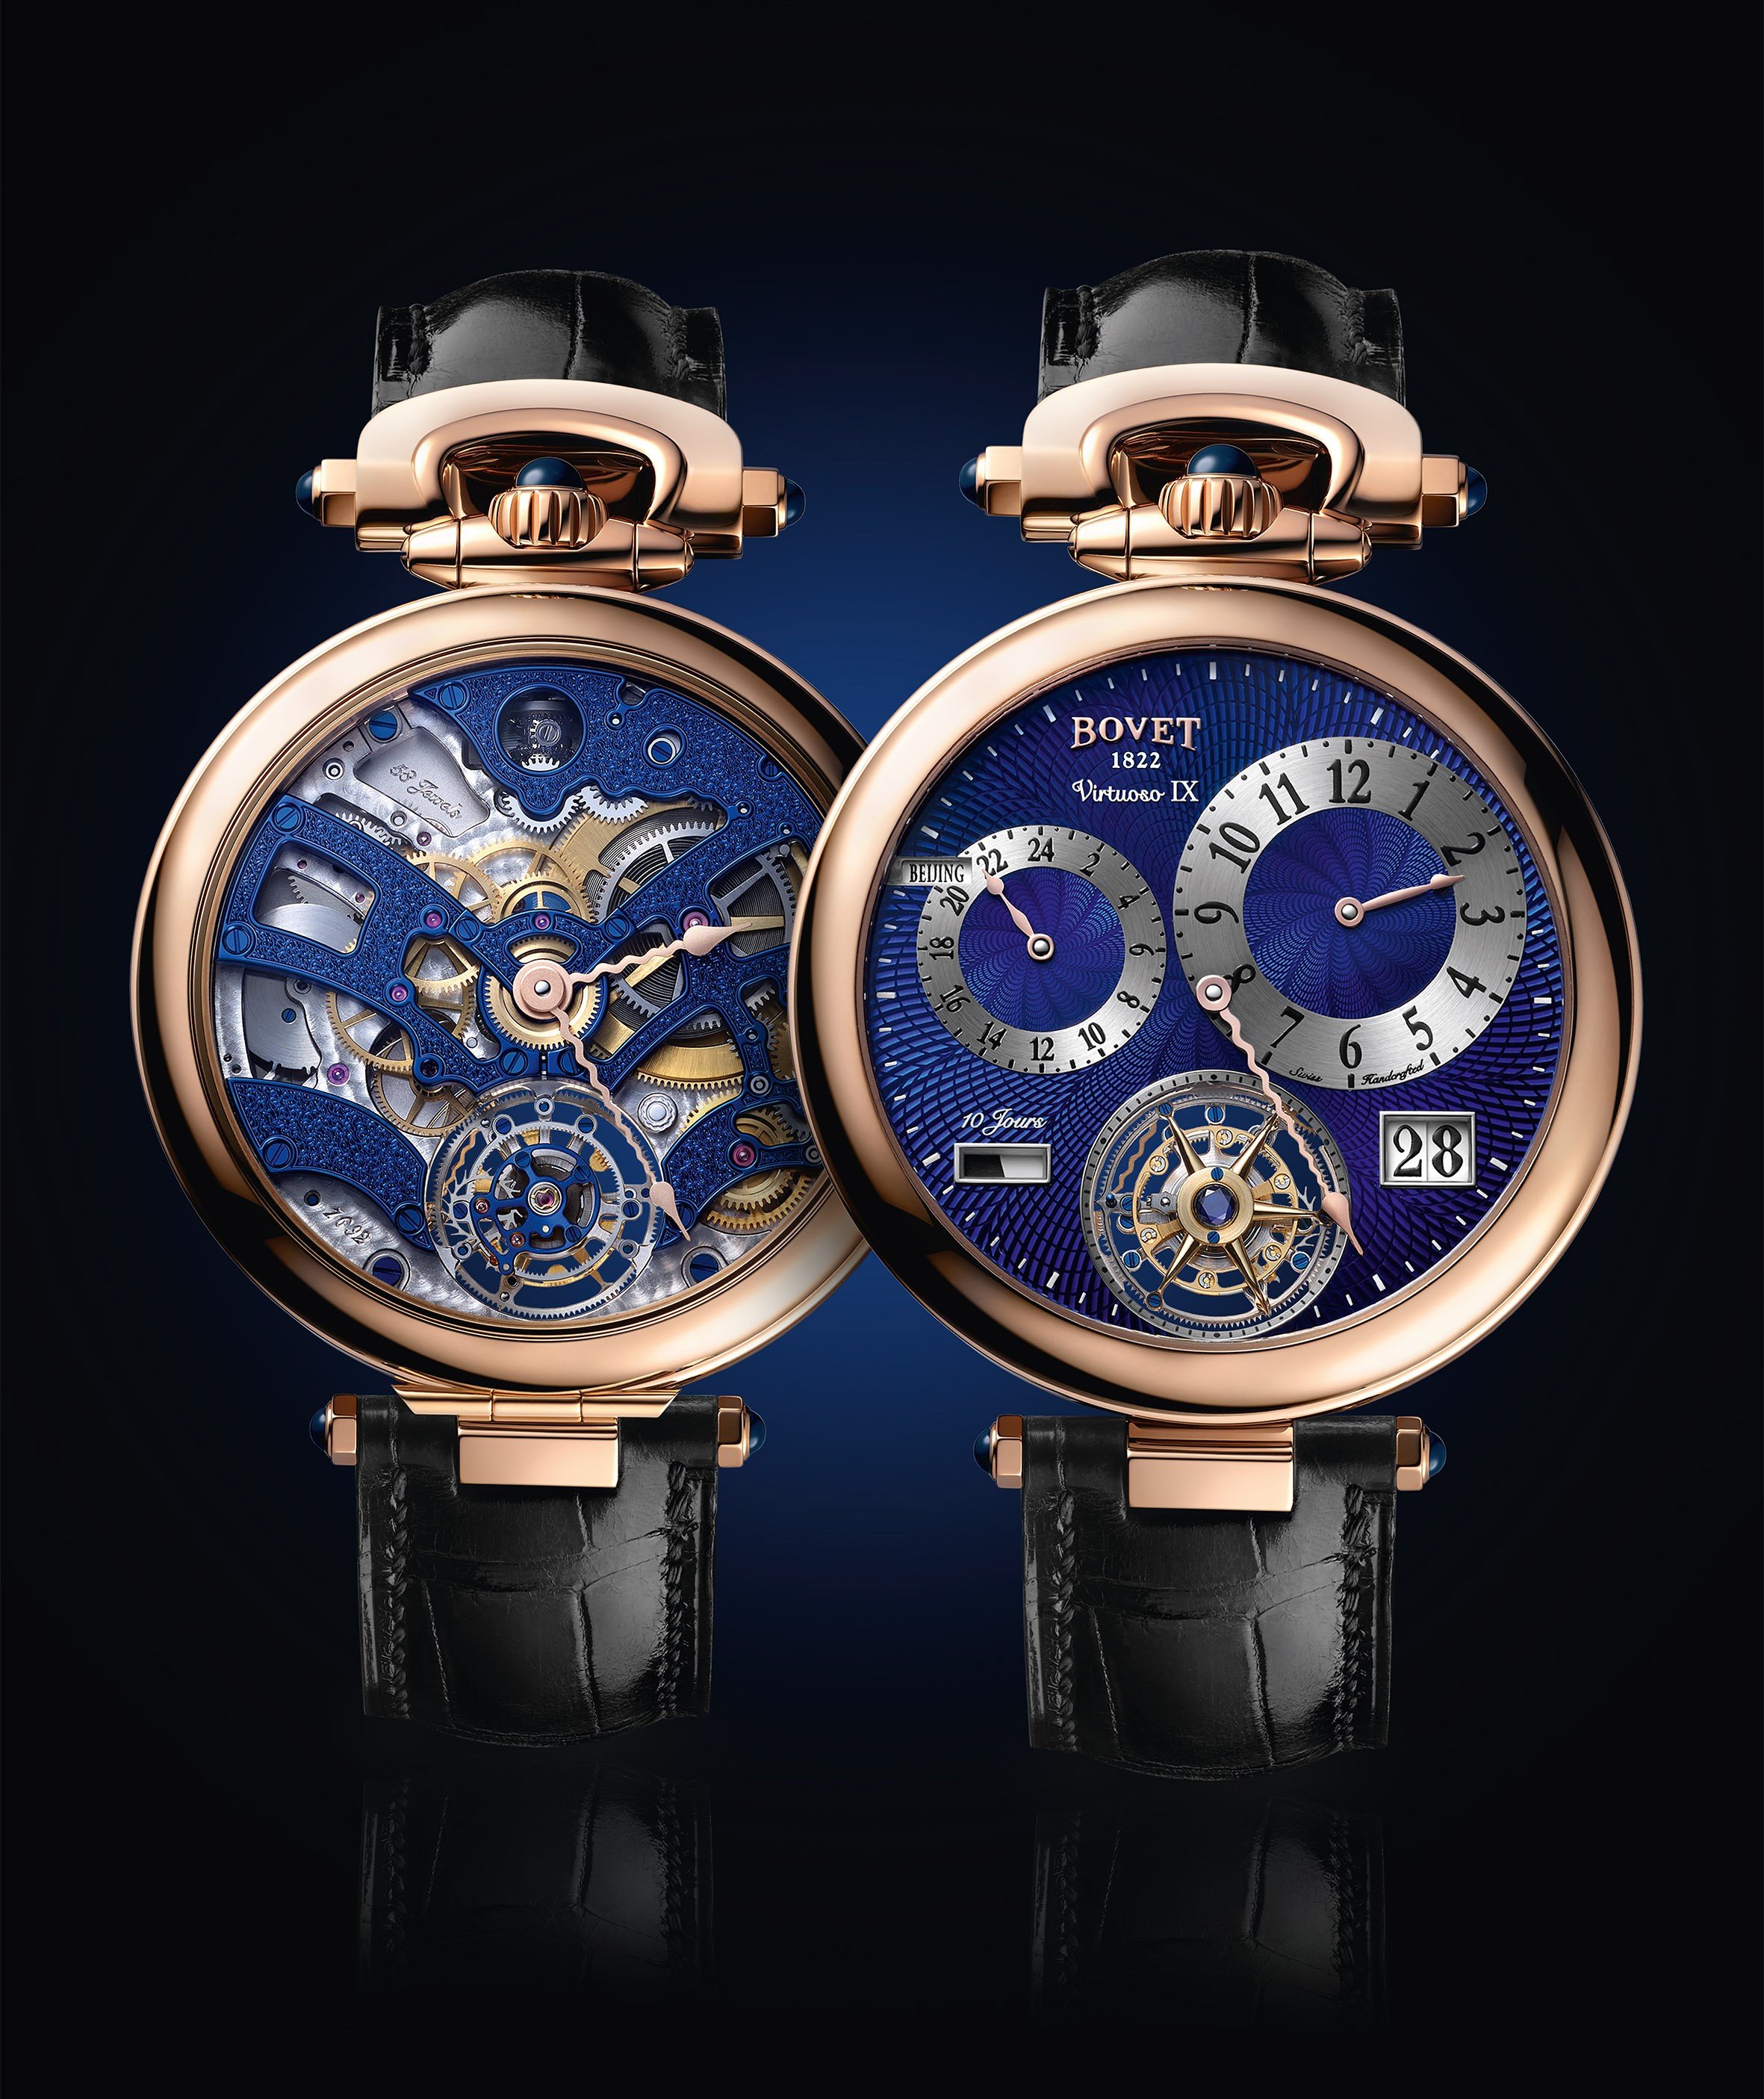 Bovet’s reversible Tourbillon Amadeo Fleurier Virtuoso IX, which the Swiss luxury watchmaker is unveiling at this week’s SIHH 2019 watch fair in Geneva.